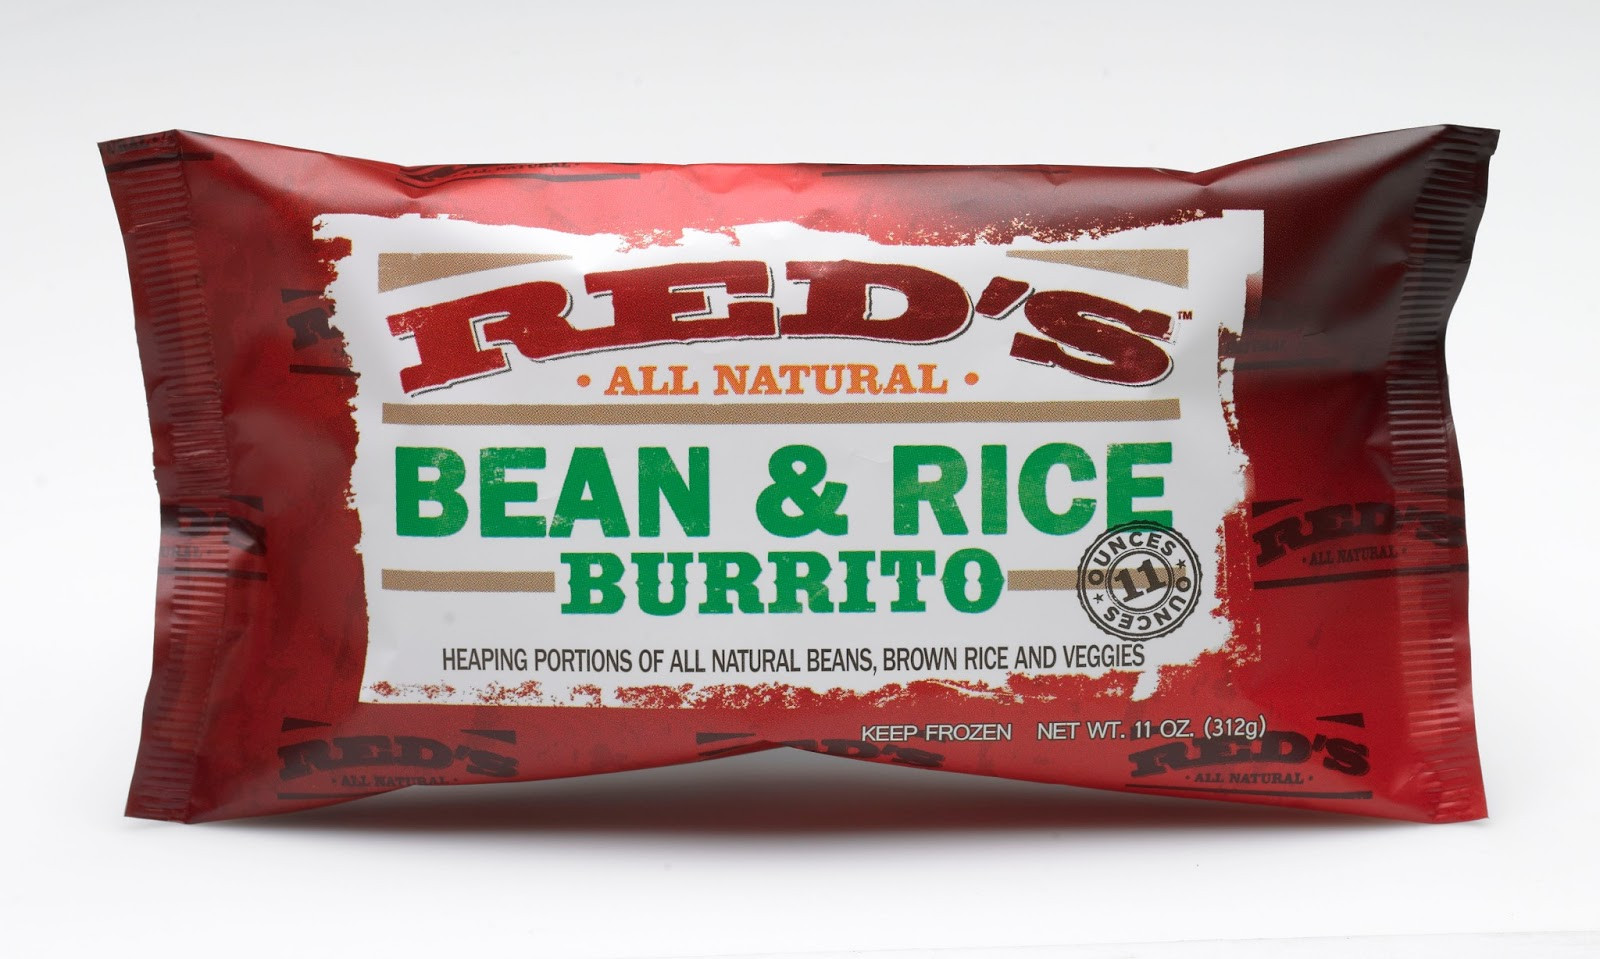 Reds Organic Burritos
 The "Cleanest" Frozen Burrito Red s All Natural Review